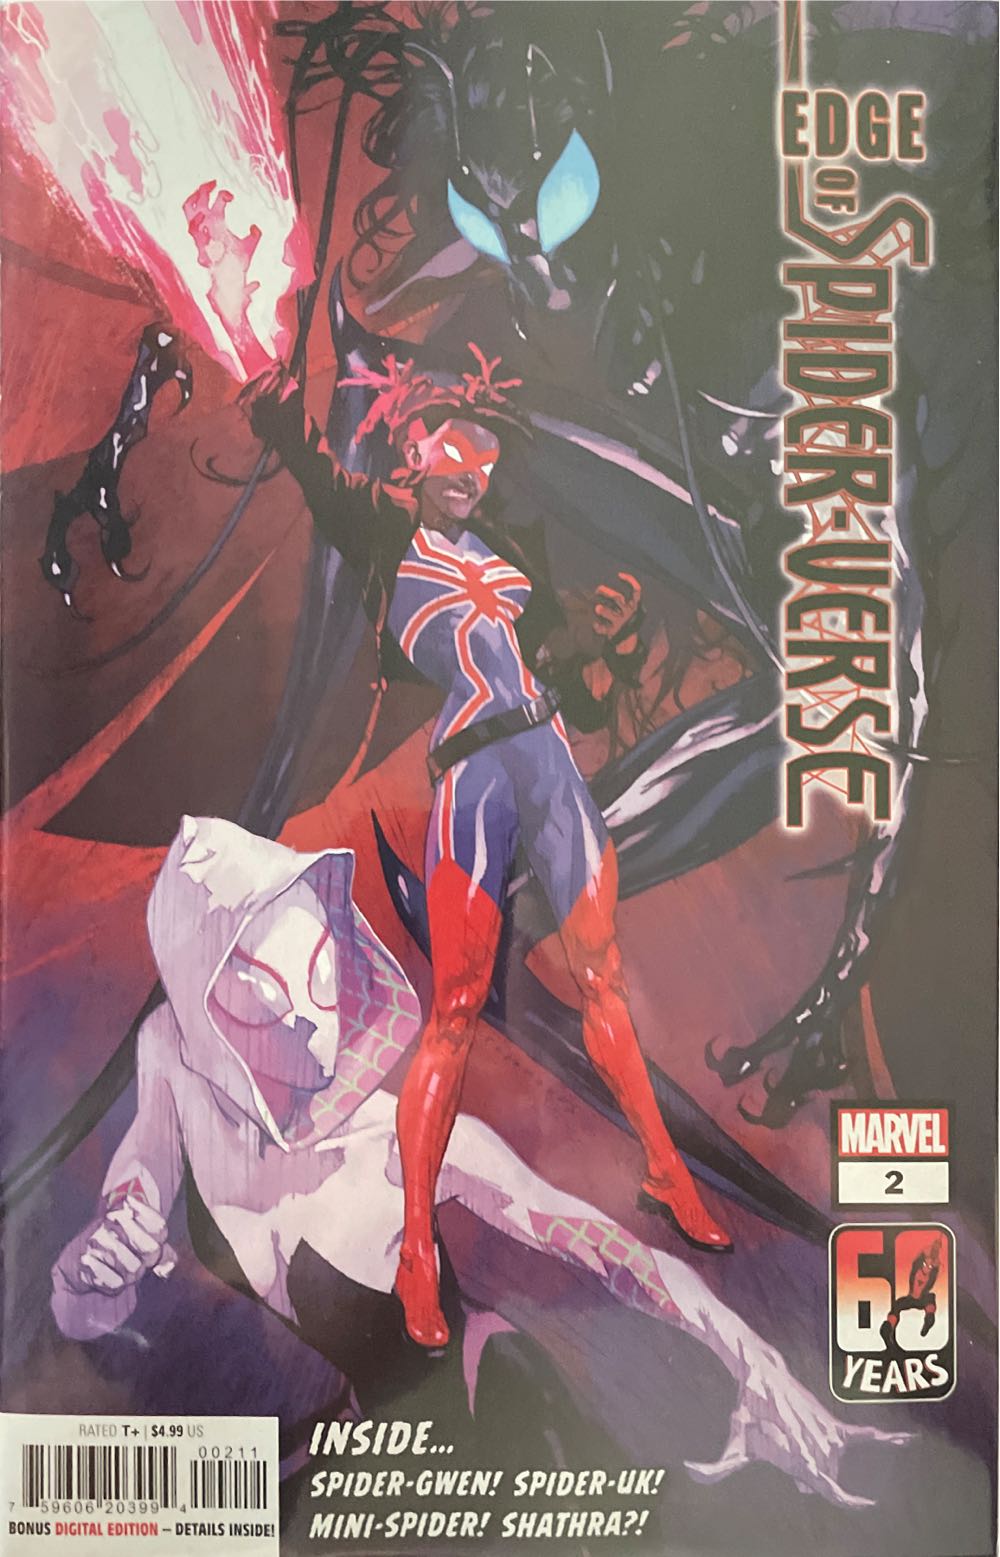 Edge of Spider-Verse - Marvel Comics (2 - 10/2022) comic book collectible [Barcode 75960620399400211] - Main Image 1